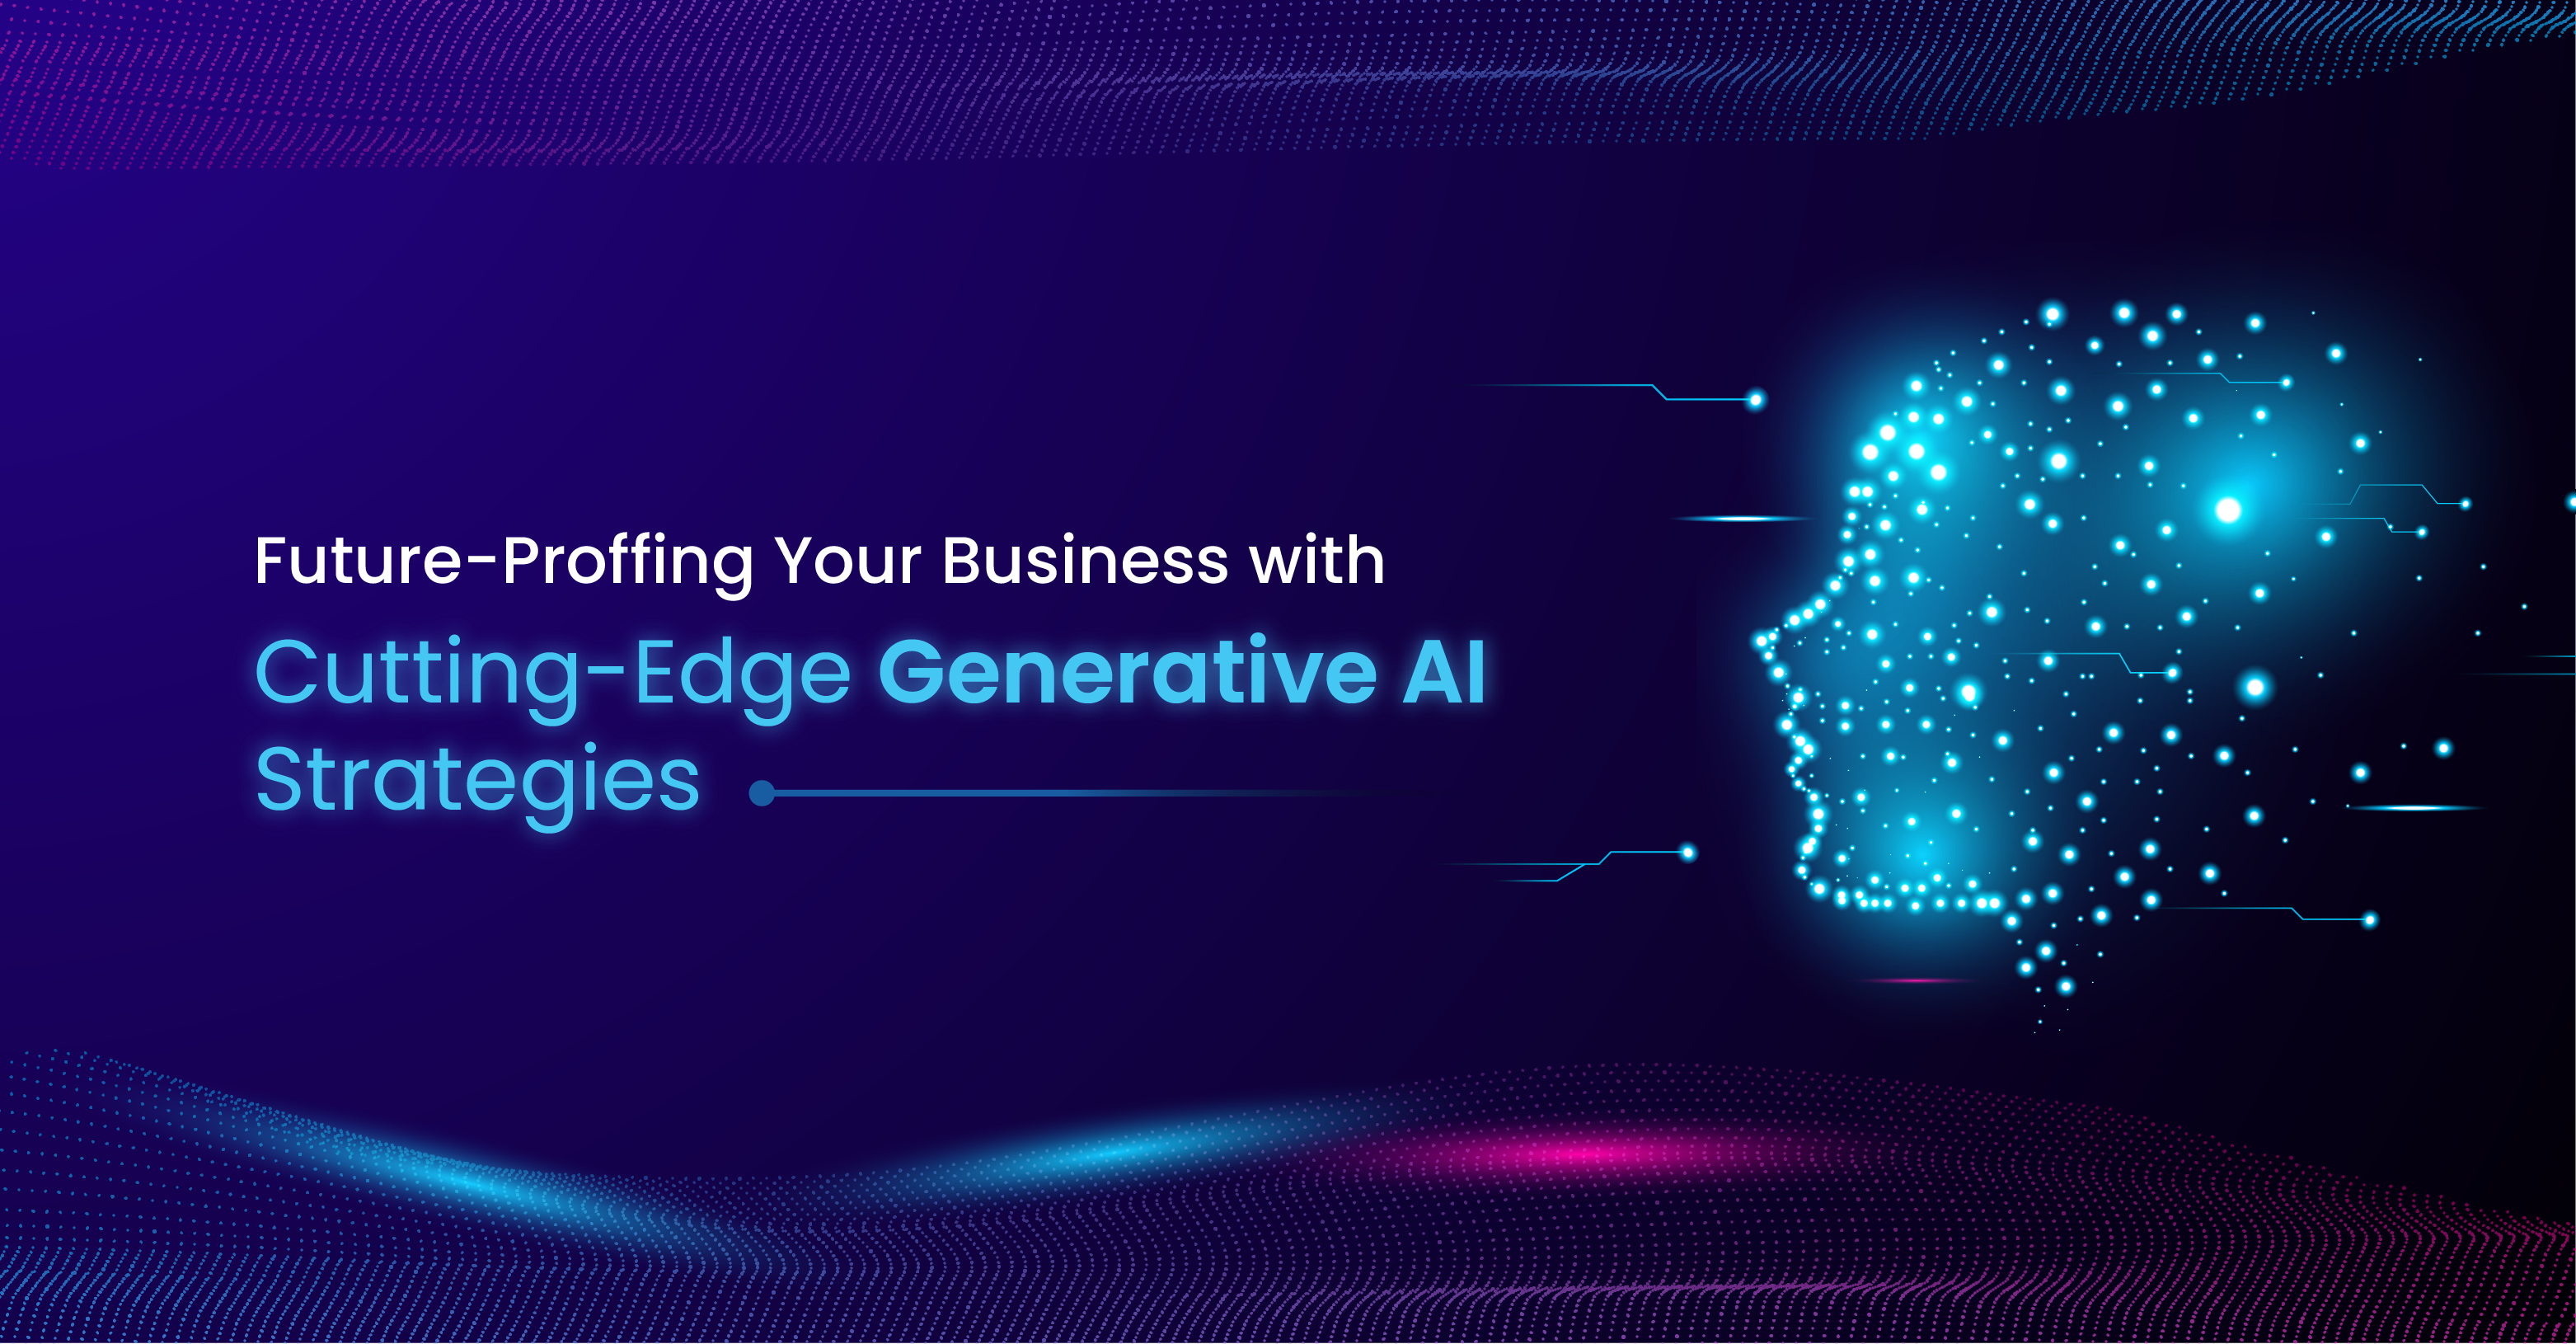 Future-Proofing Your Business with Generative AI Strategies